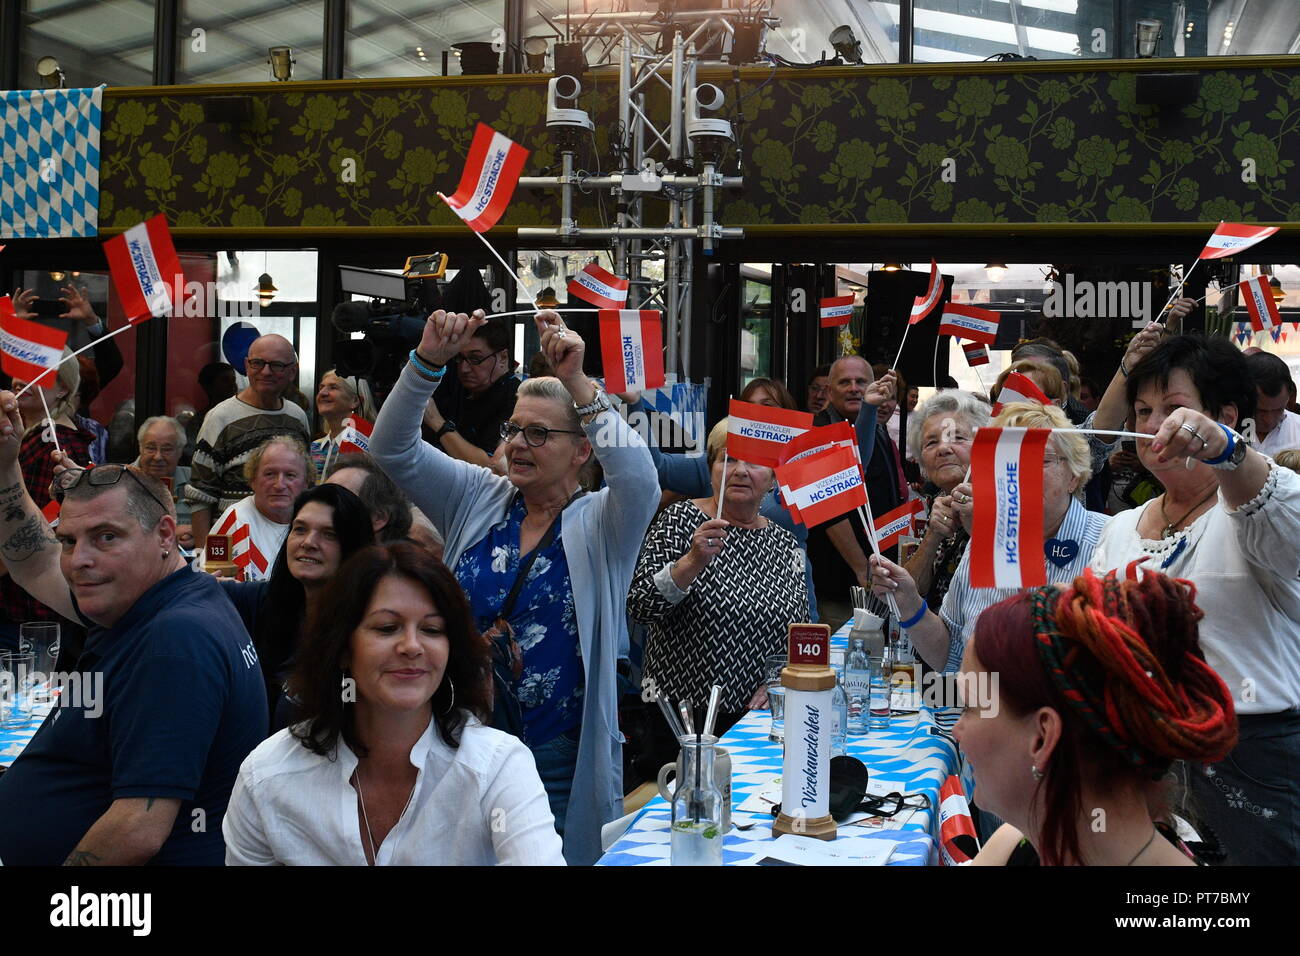 Vienna, Austria. October 7, 2018. Family celebration of the FPÖ (Freedom  Party Austria). Picture shows visitors of the Family celebration. Credit:  Franz Perc / Alamy Live News Stock Photo - Alamy